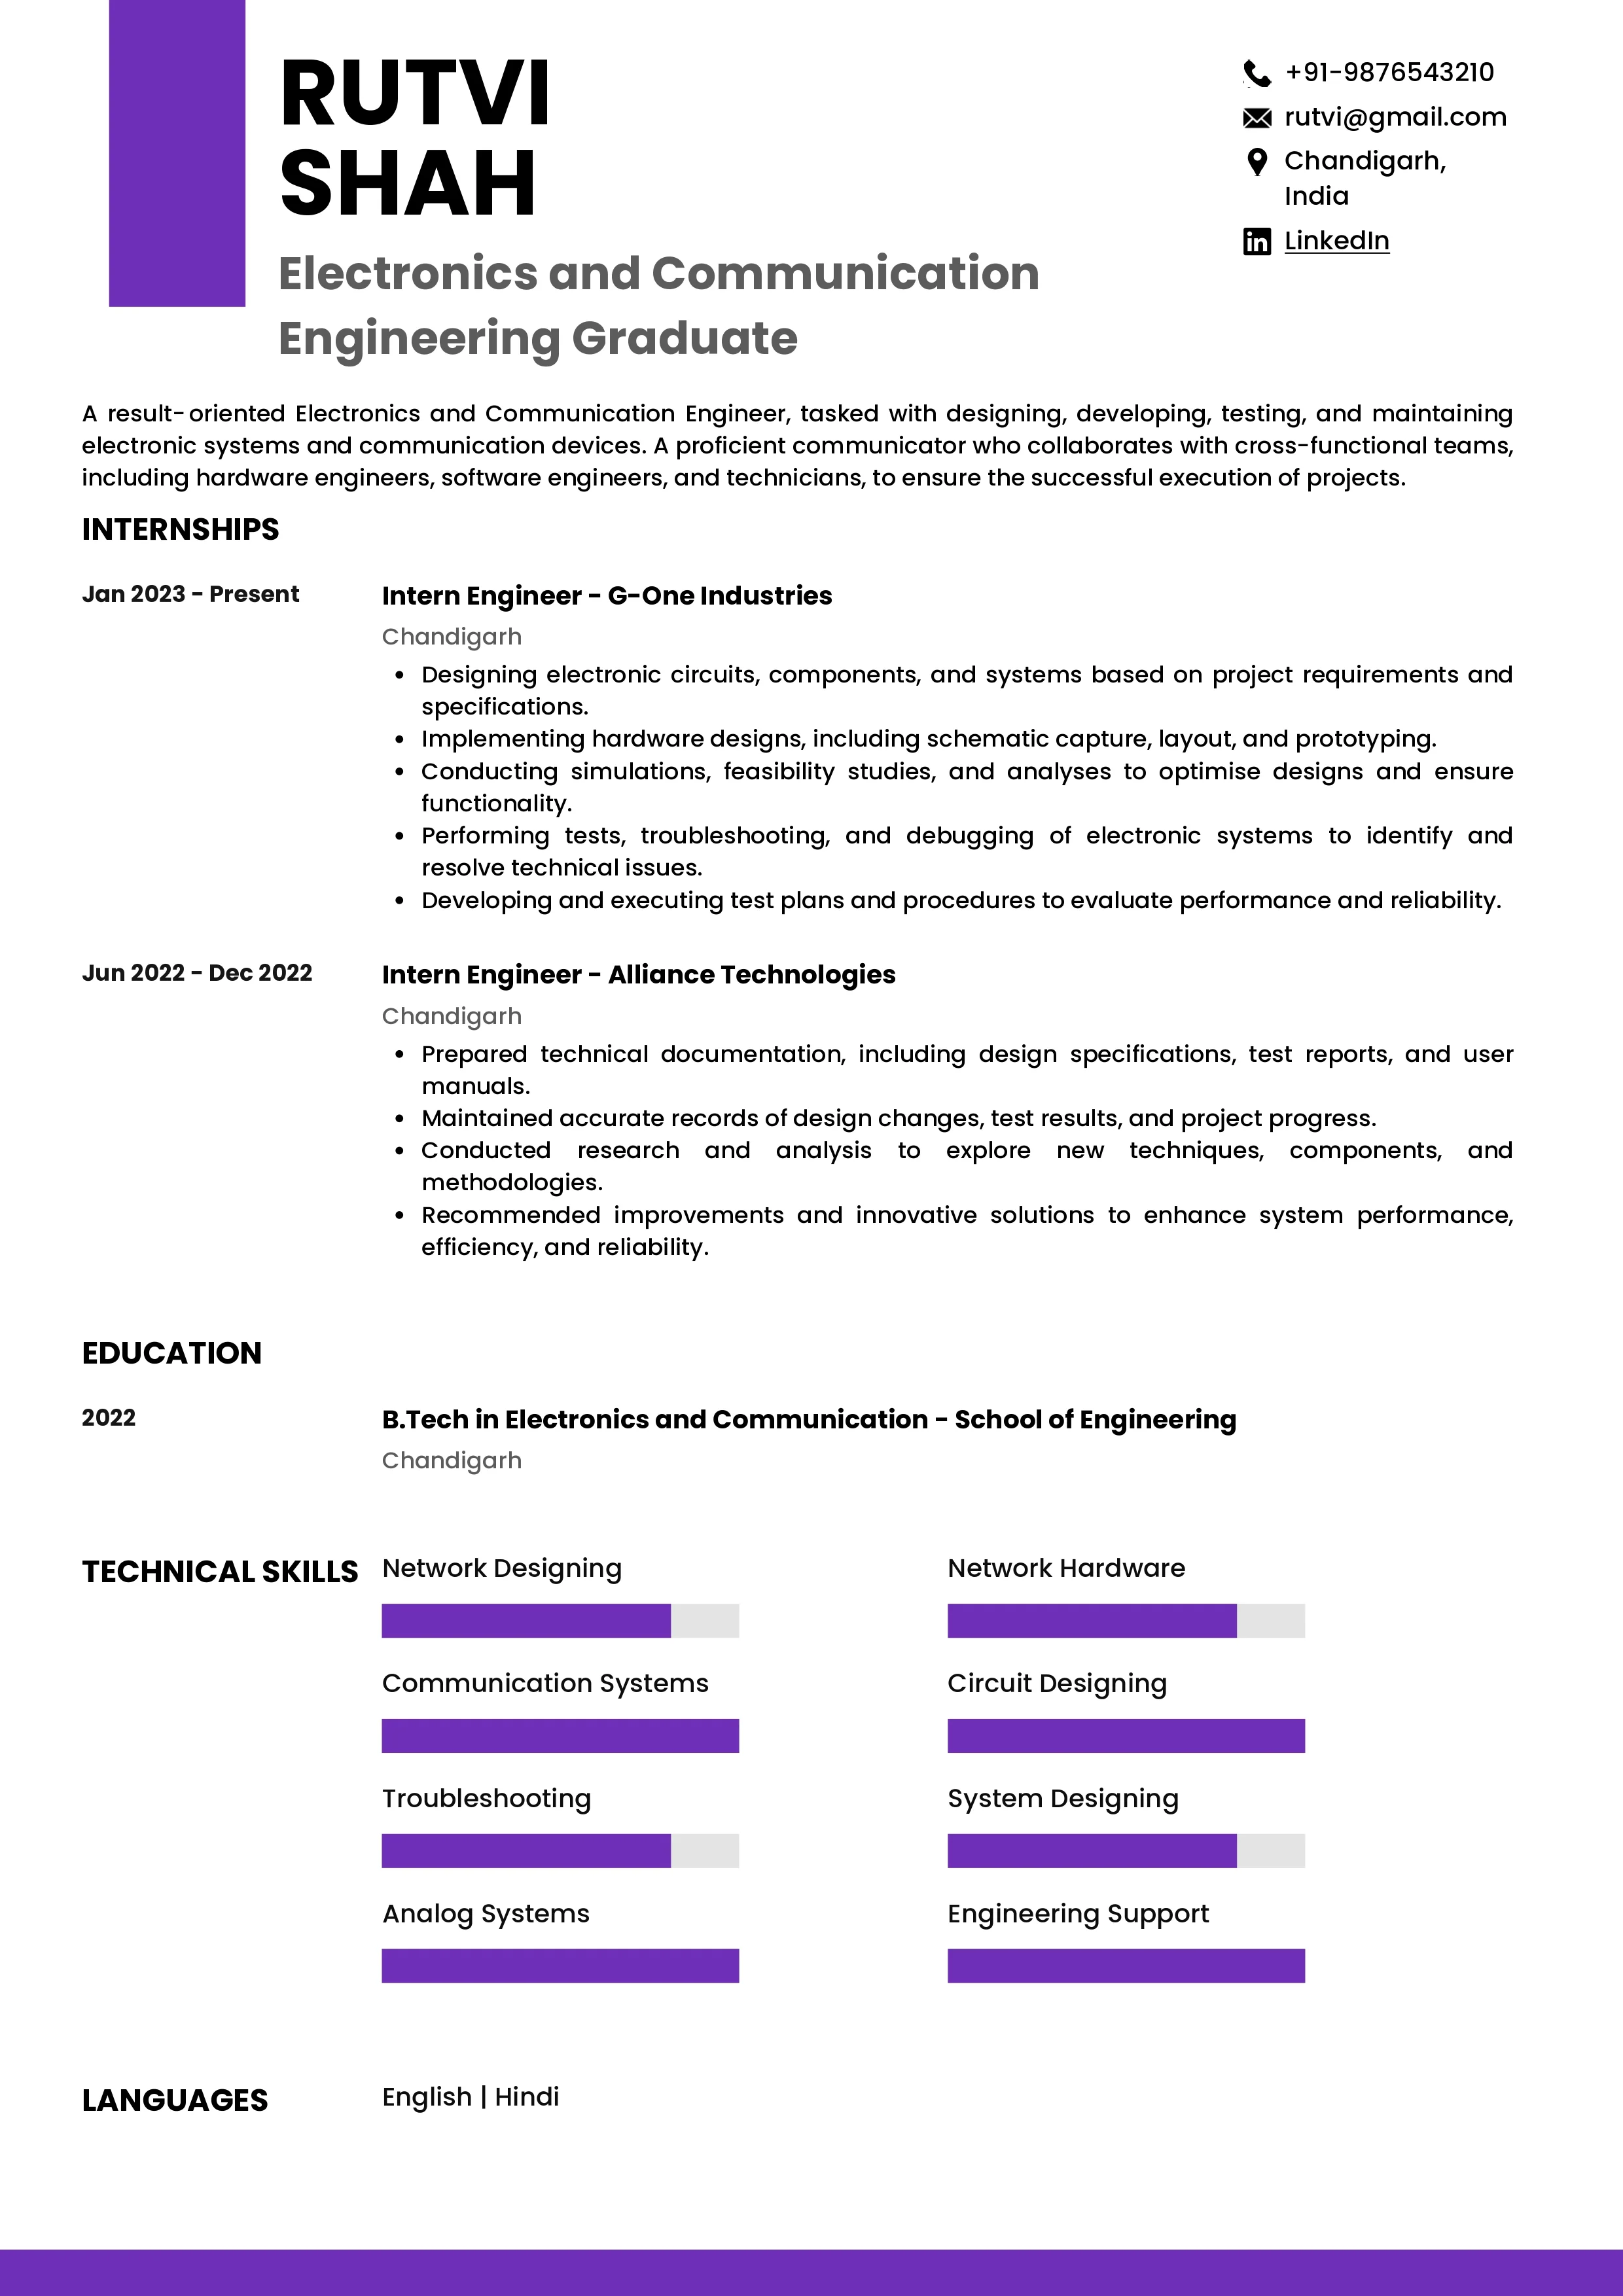 Sample Resume of Electronics and Communication (ECE) Graduate | Free Resume Templates & Samples on Resumod.co